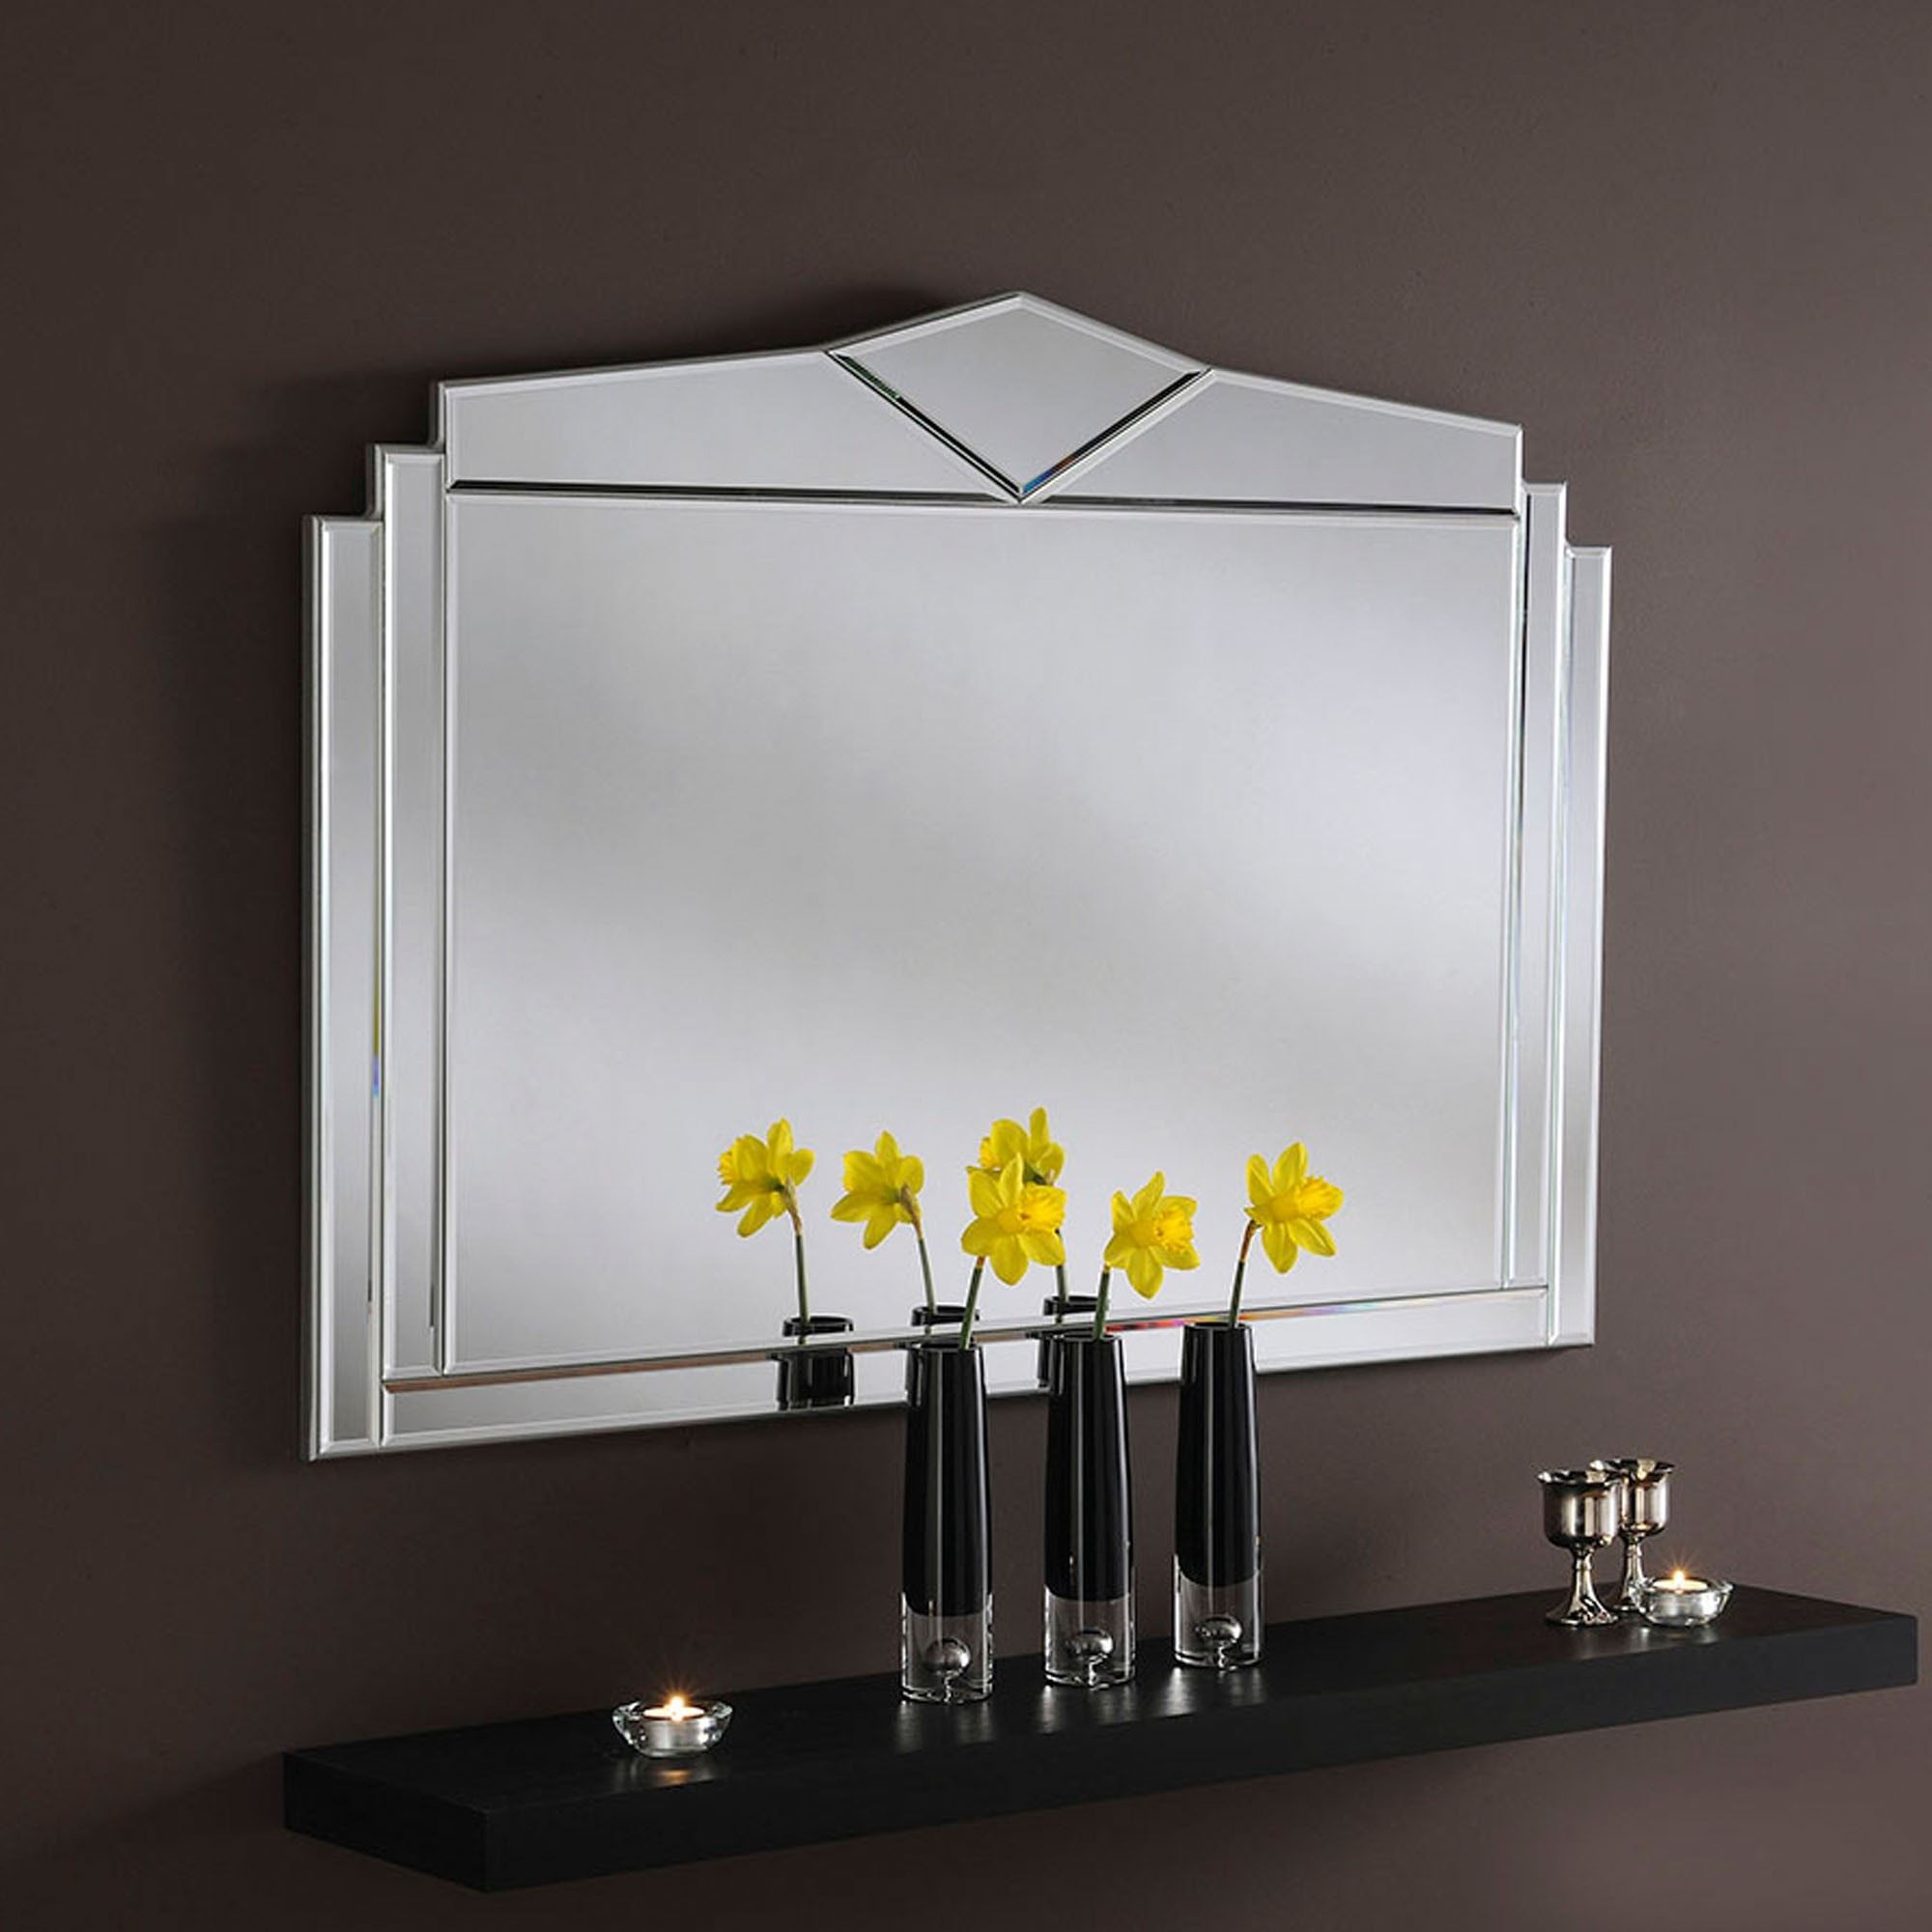 Decorative Art Deco Silver Wall Mirror | Wall Mirrors For Printed Art Glass Wall Mirrors (View 5 of 15)